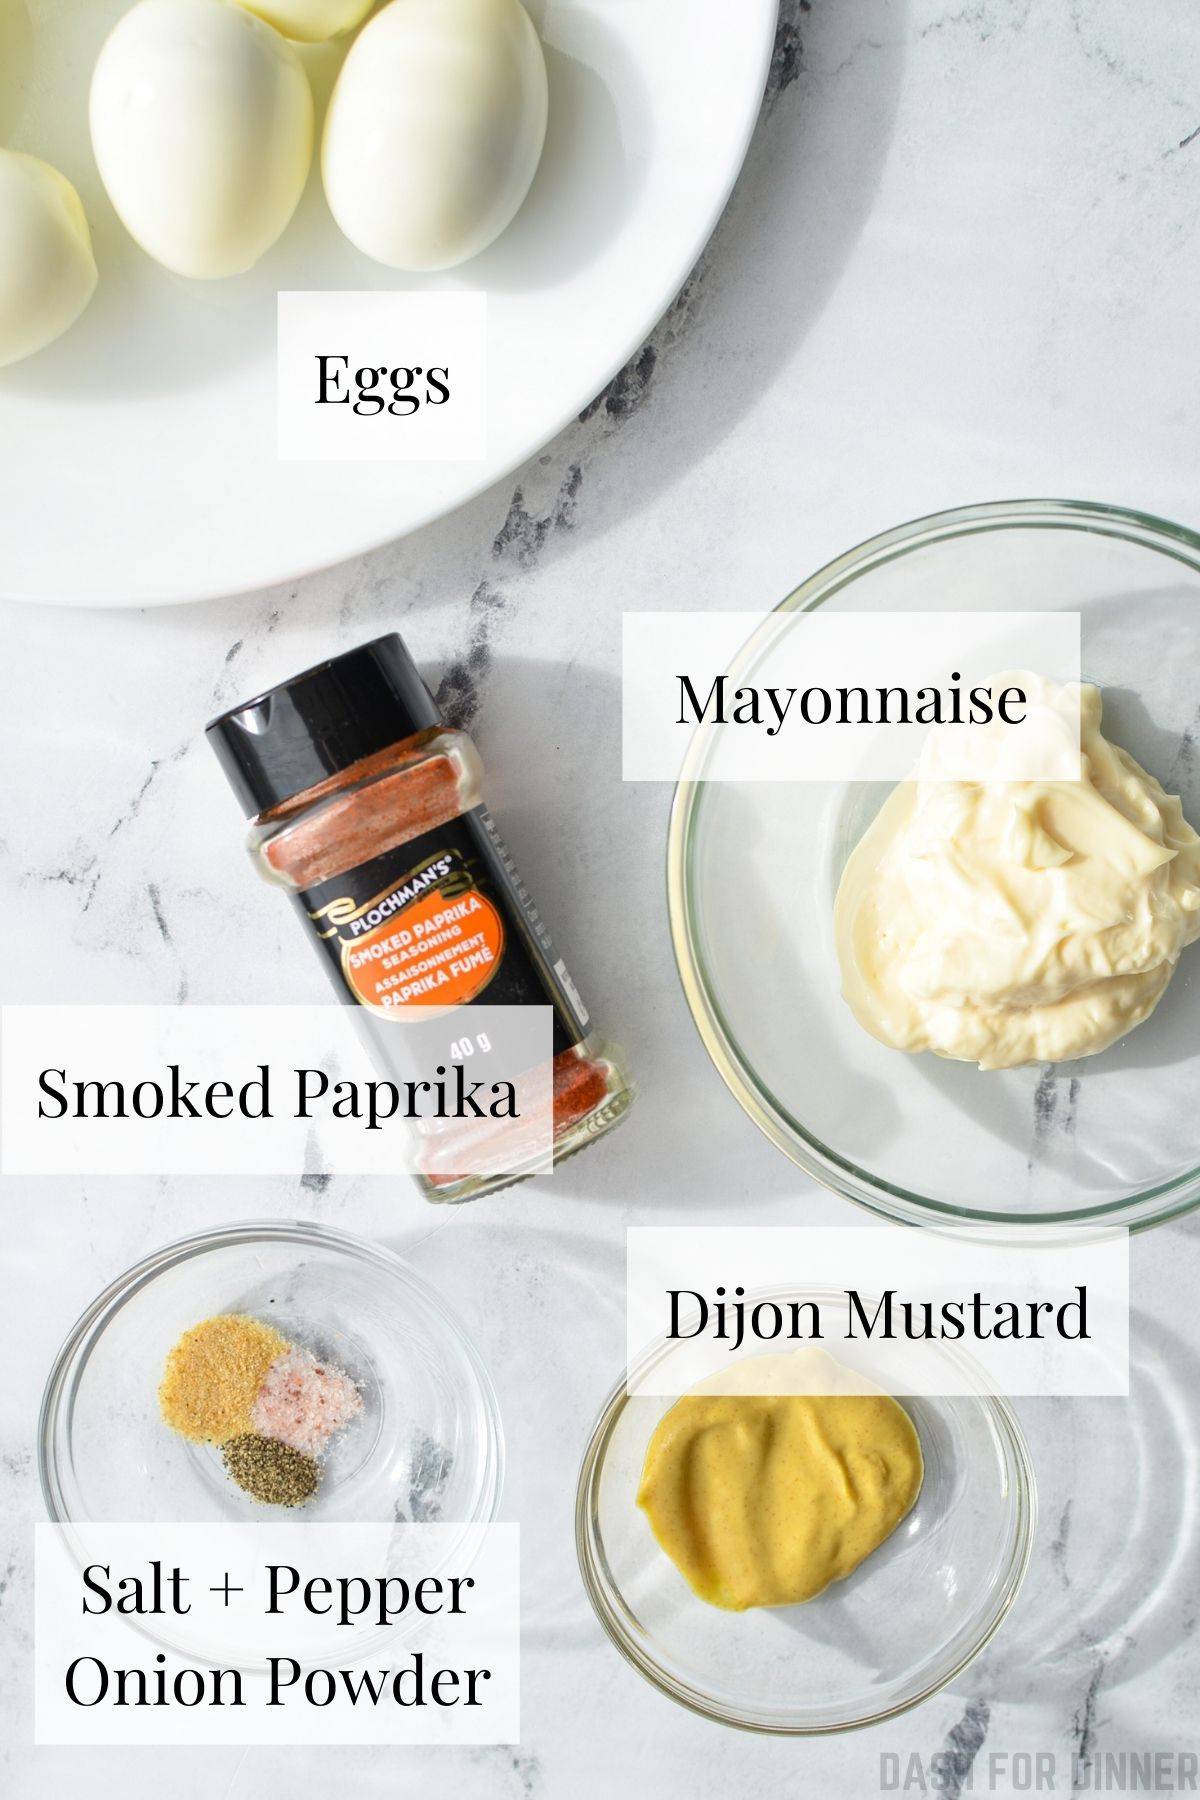 The ingredients needed to make deviled eggs, including hard boiled eggs, mayonnaise, and paprika.